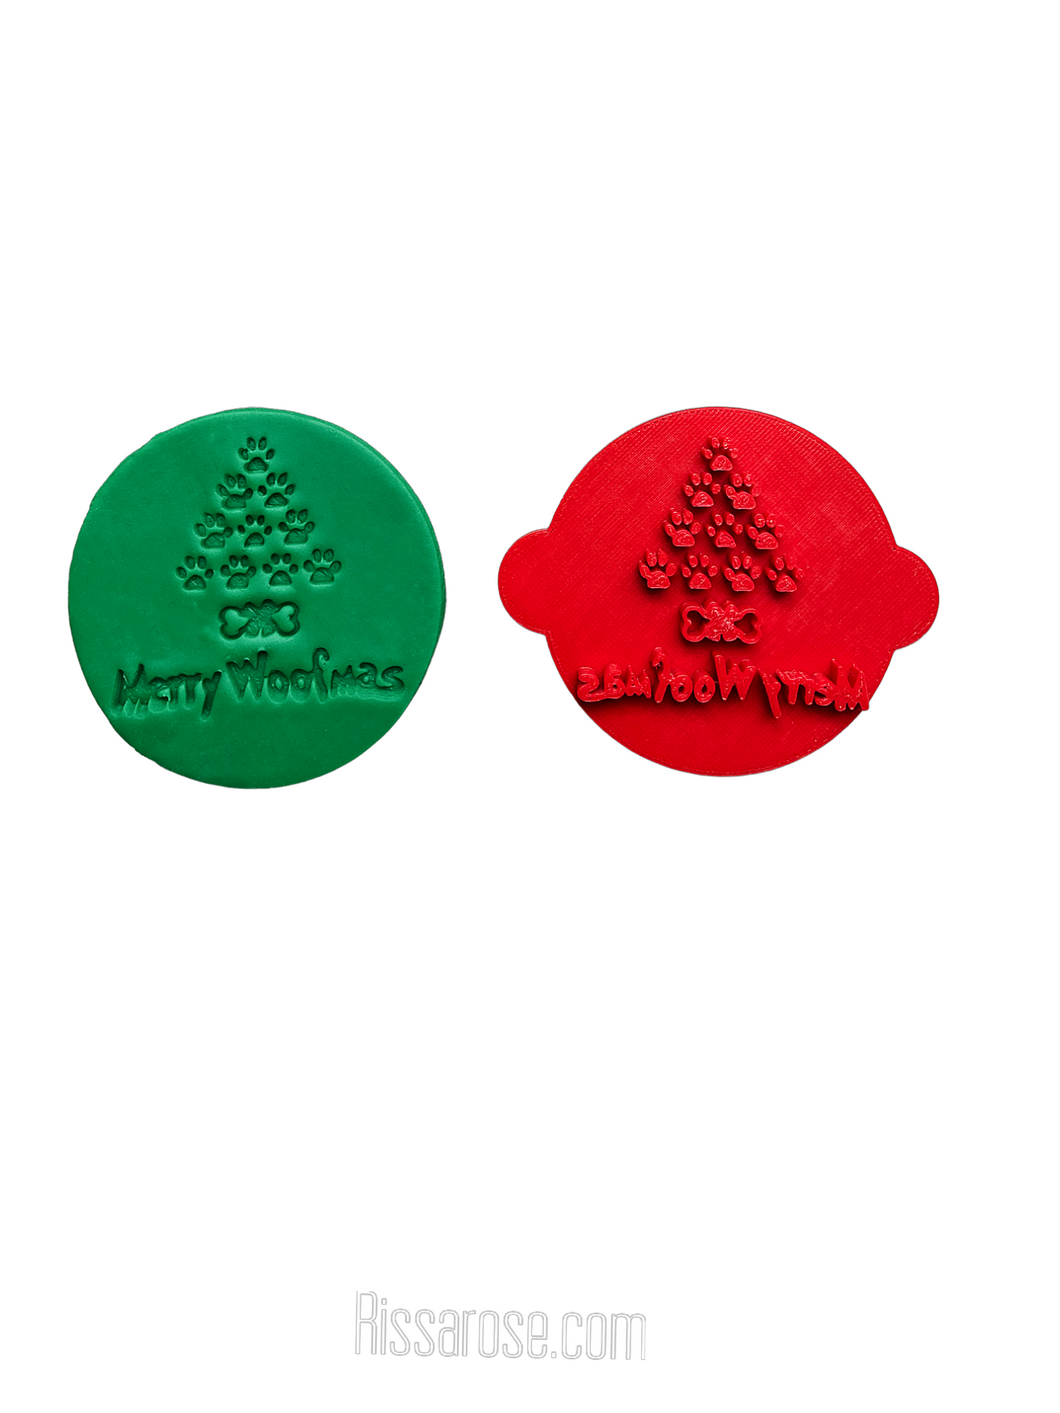 dog christmas cookie stamp cake fondant embosser - merry woofmas here comes to santa paw merry woofmas